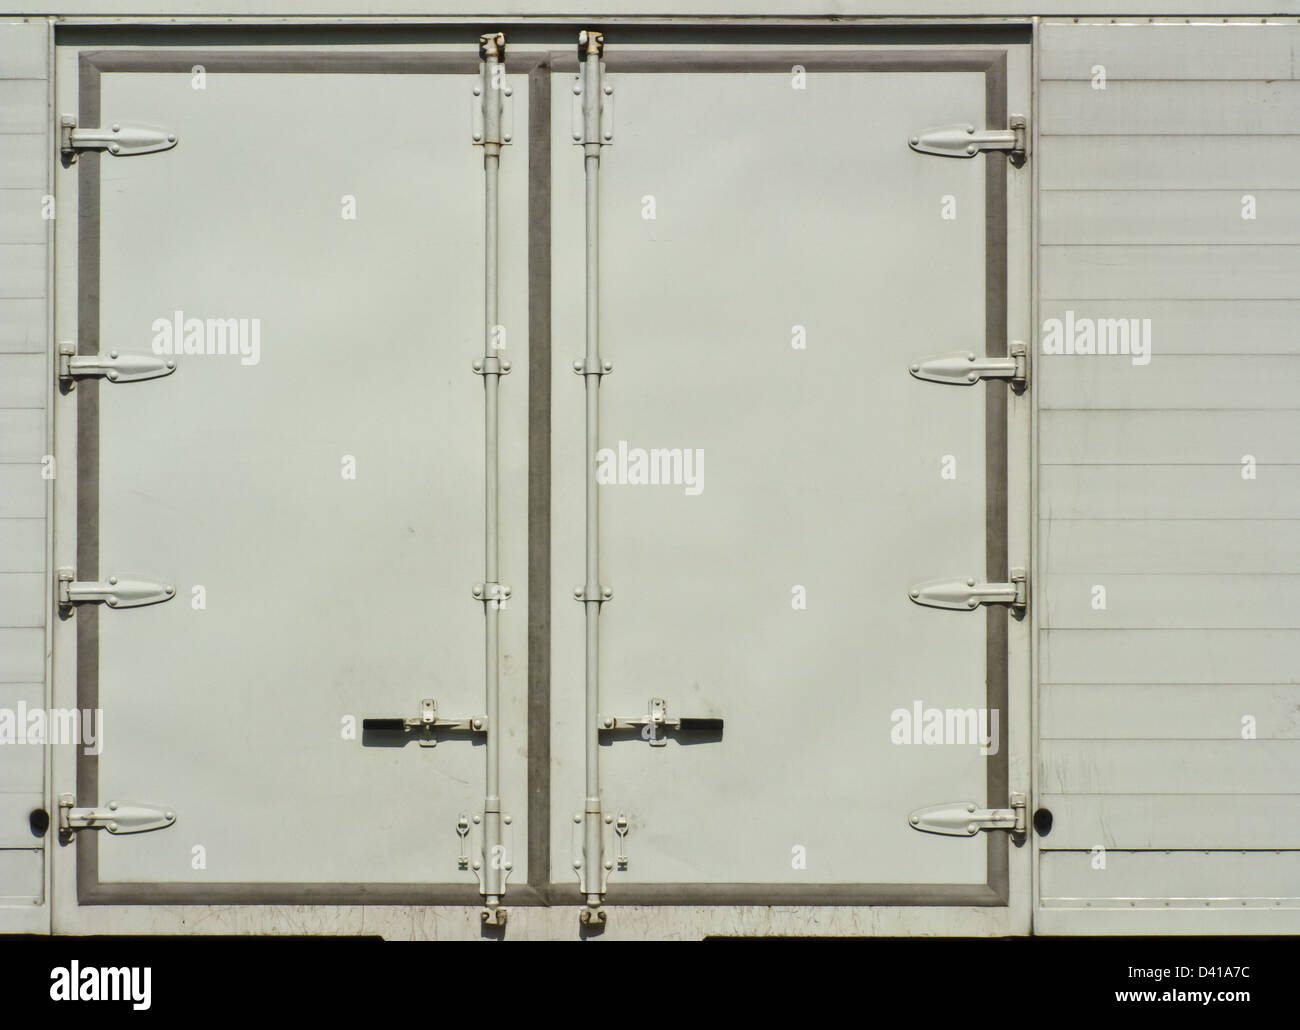 Side of container truck as background Stock Photo